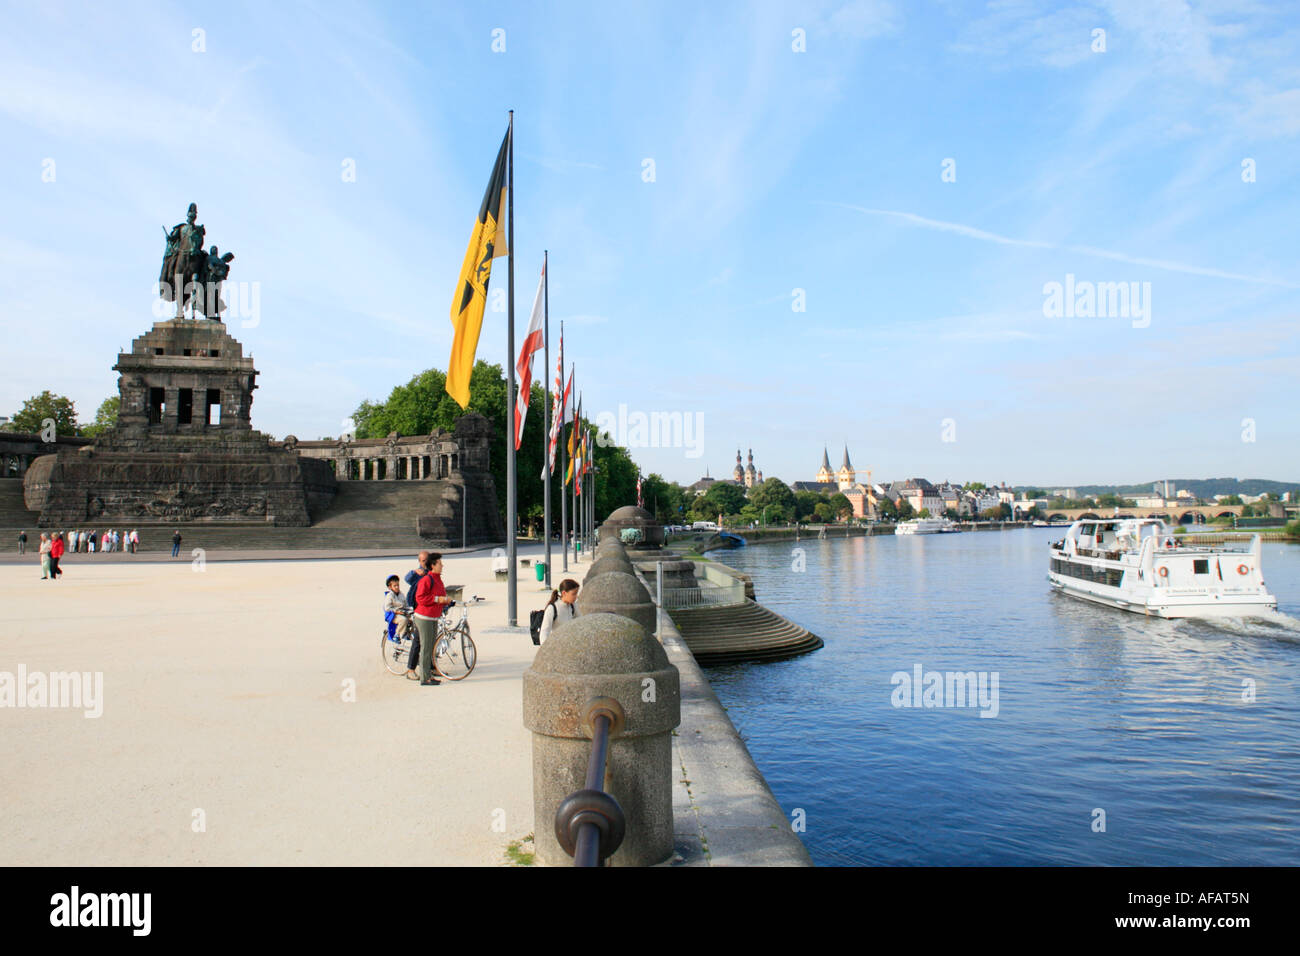 German Corner (Deutsches Eck) with the Equestrian statue of Kaiser Wilhelm I and River Moselle in Koblenz in Germany. Stock Photo